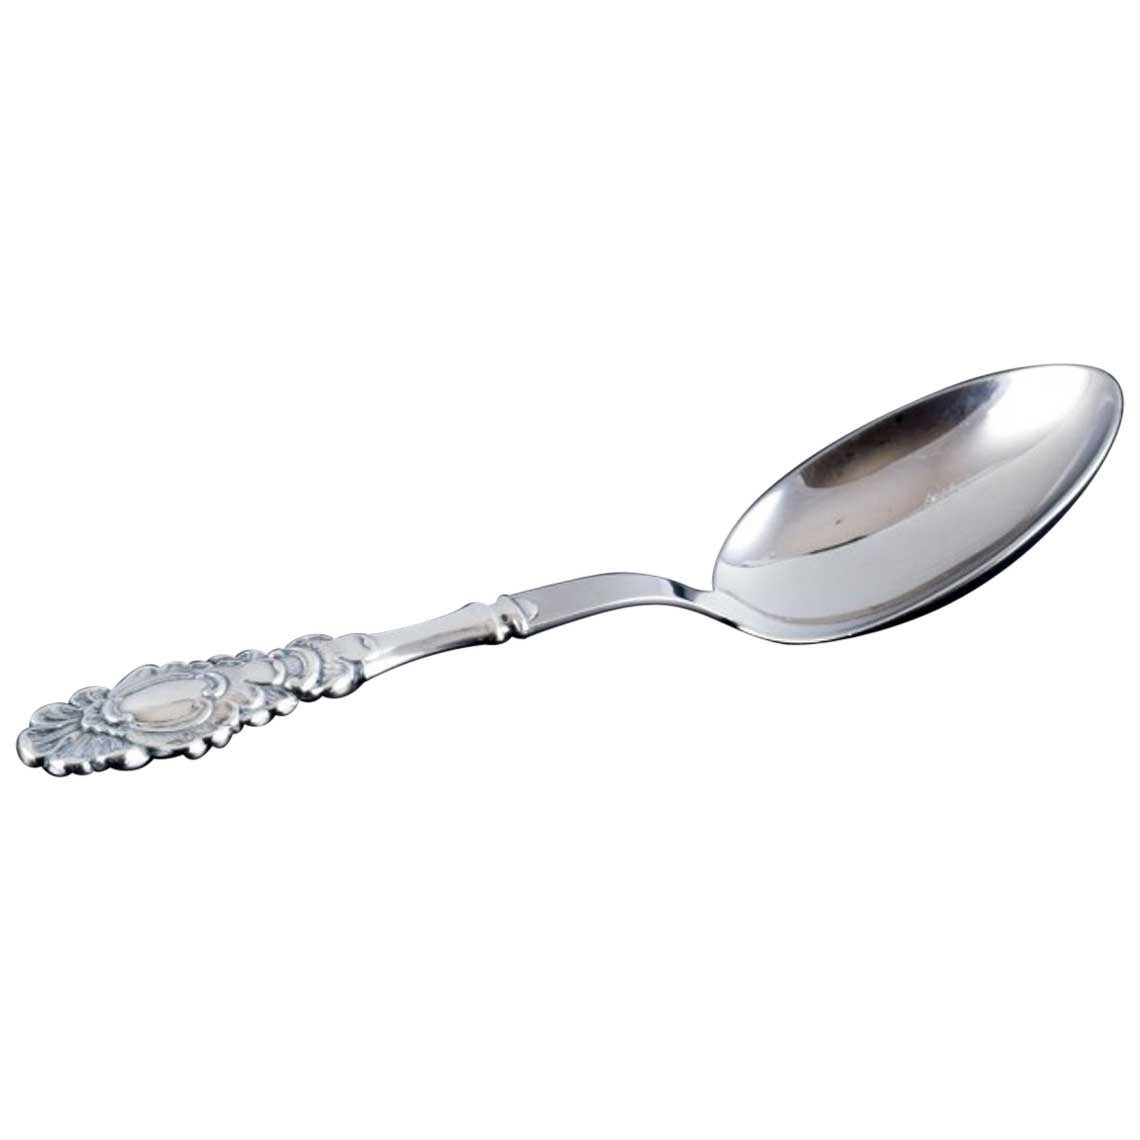 Danish silversmith. Serving spoon in Danish 830 silver and stainless steel. For Sale